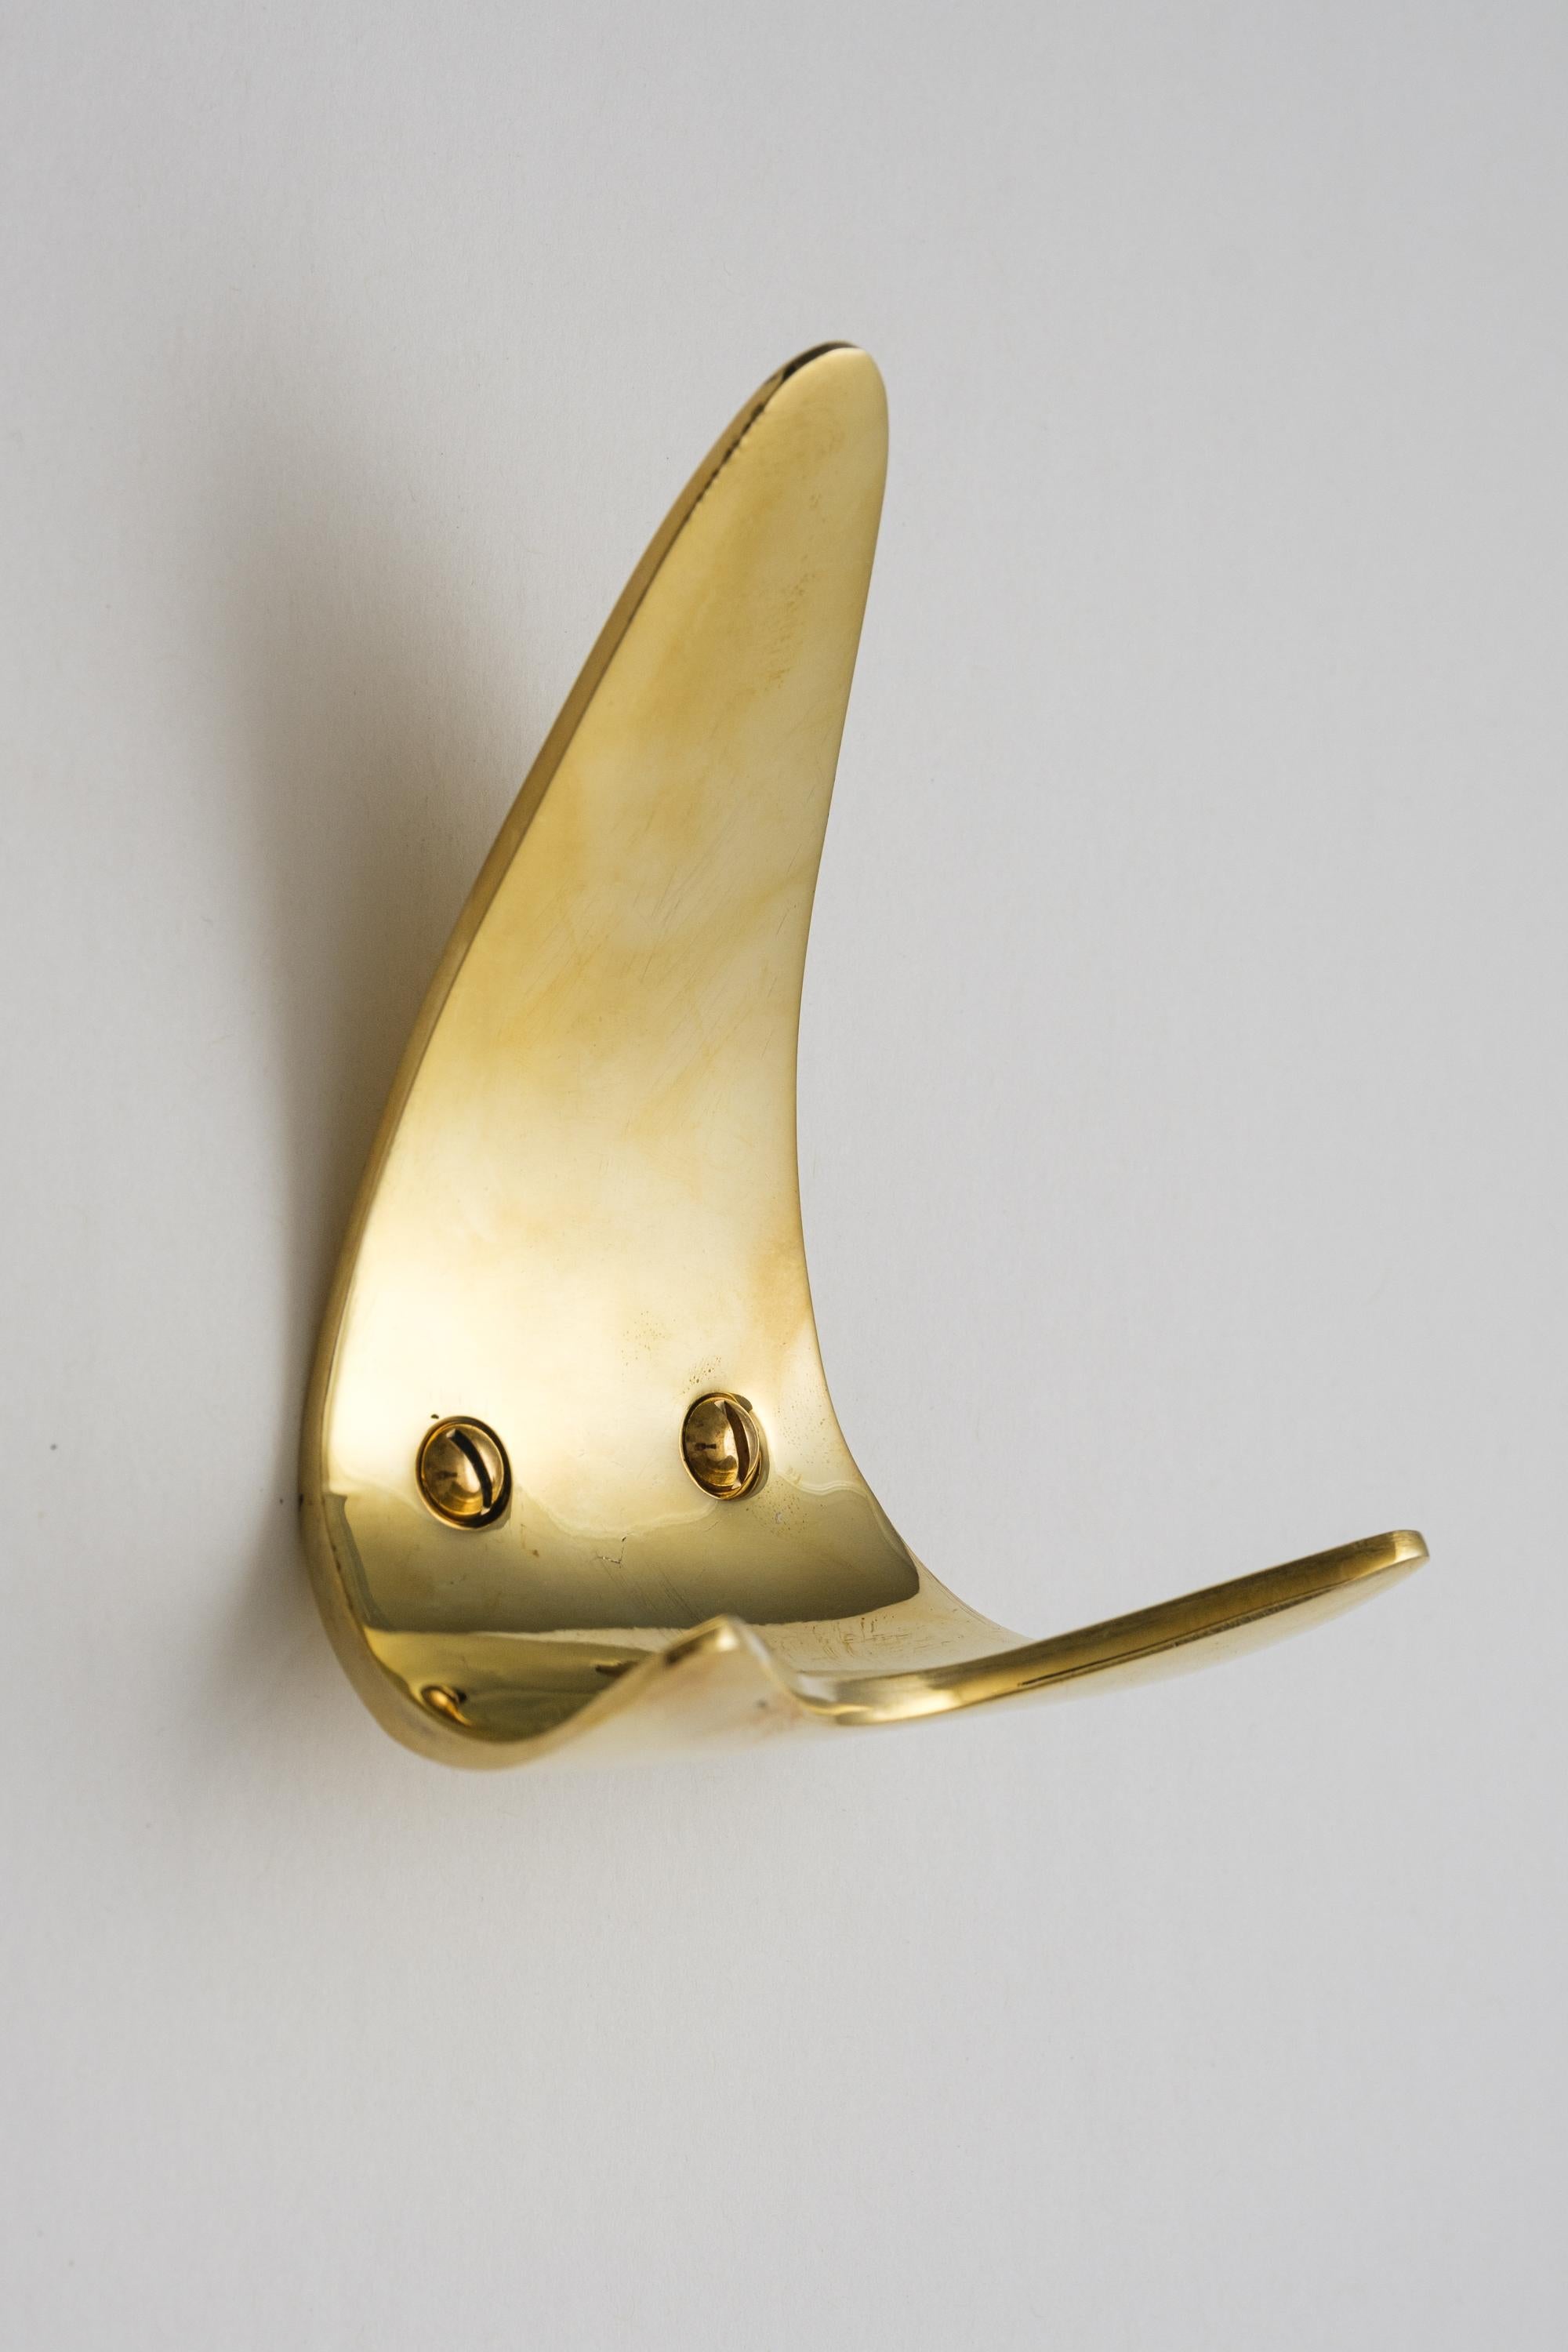 Carl Auböck Model #4086 hook in polished brass. Designed in the 1950s, this versatile and Minimalist Viennese hook is expertly executed in polished brass by Werkstätte Carl Auböck, Austria. 

Produced by Carl Auböck IV in the original Auböck